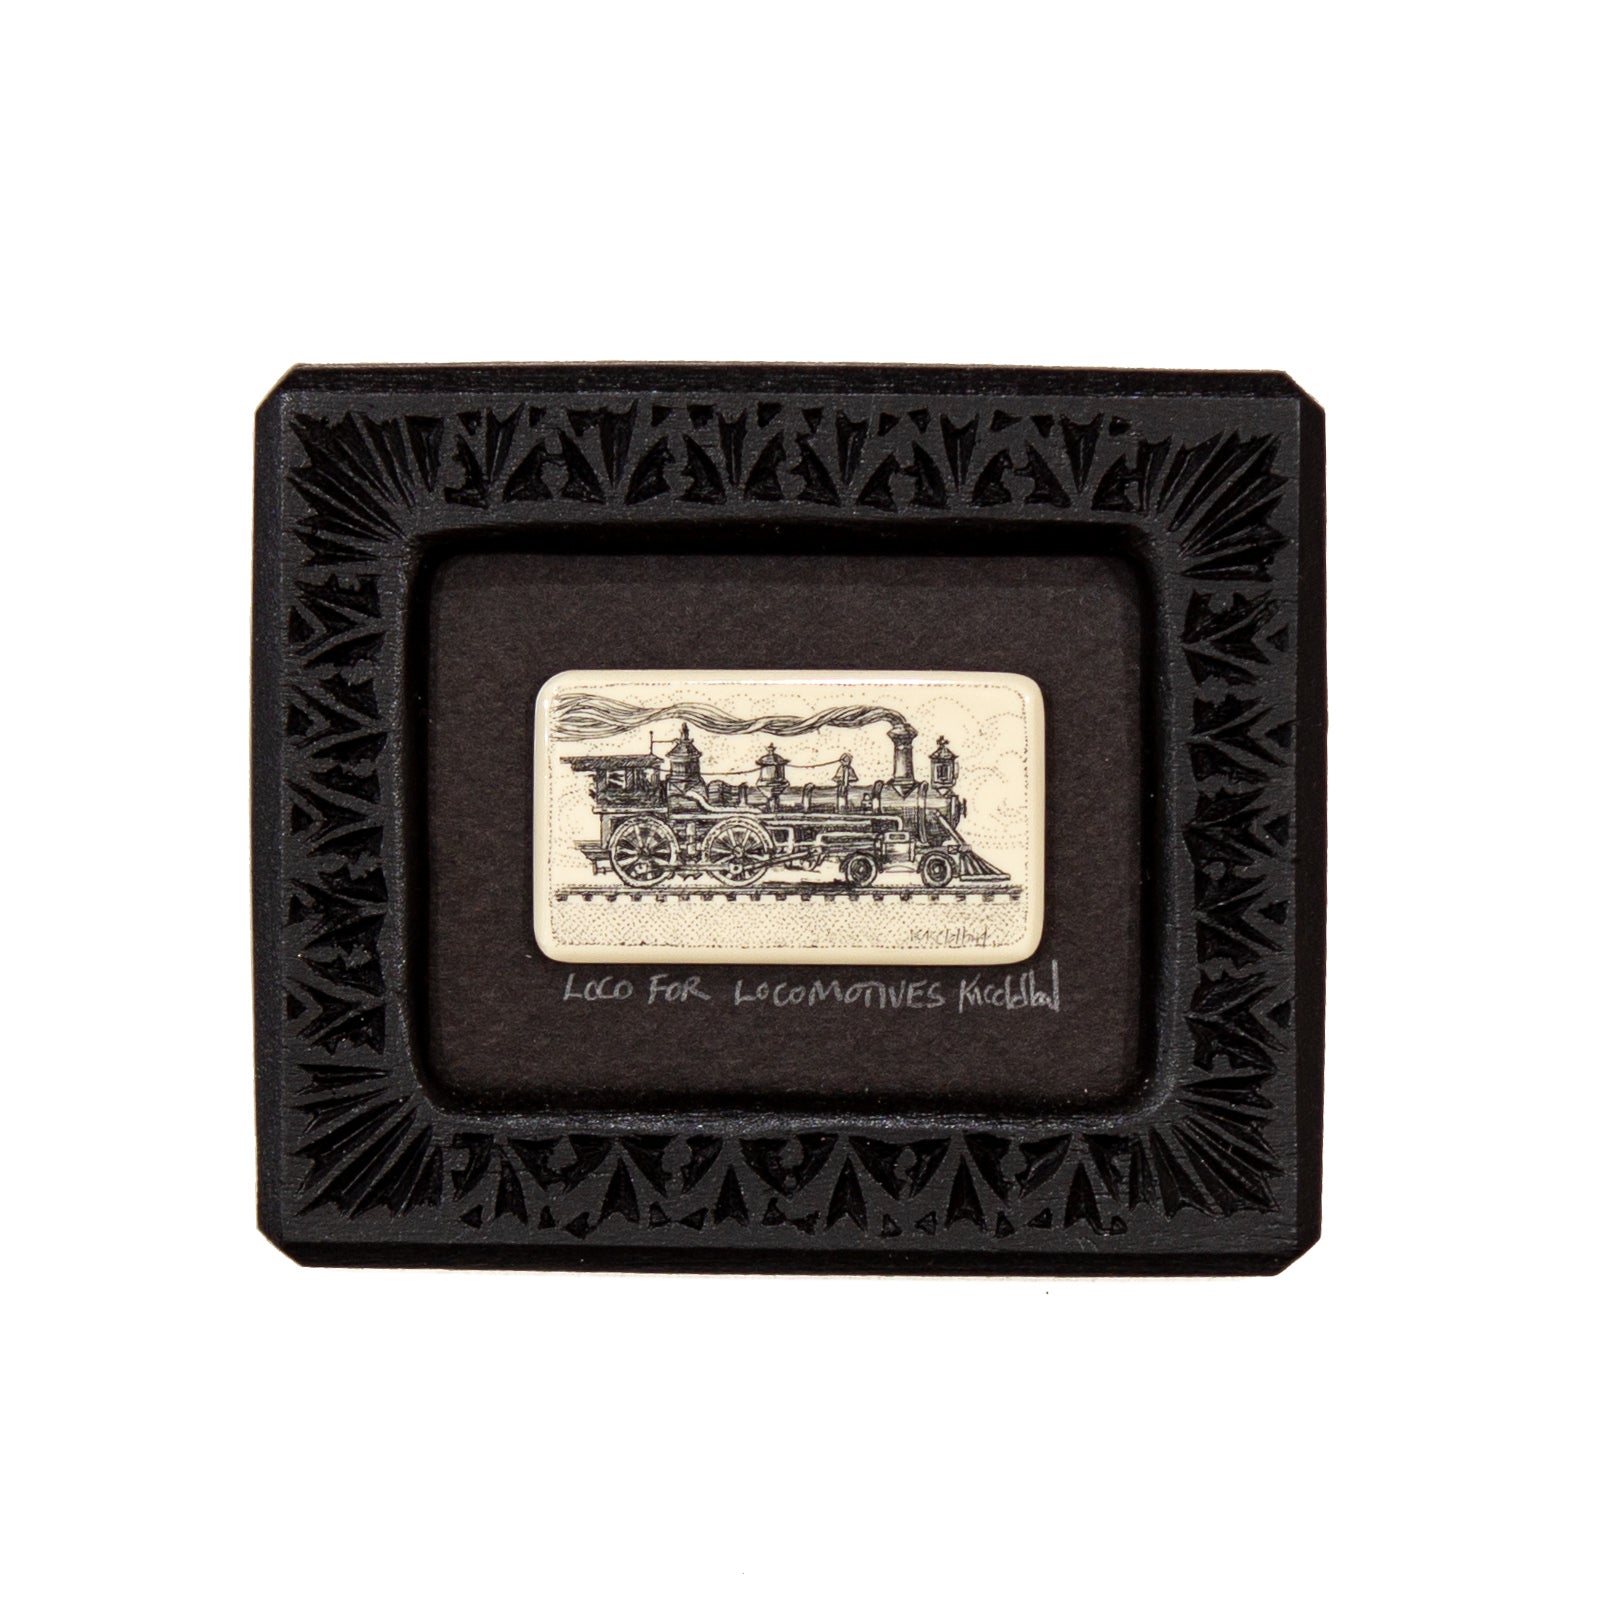 "Loco for Locomotives" Small Chip Carved Frame